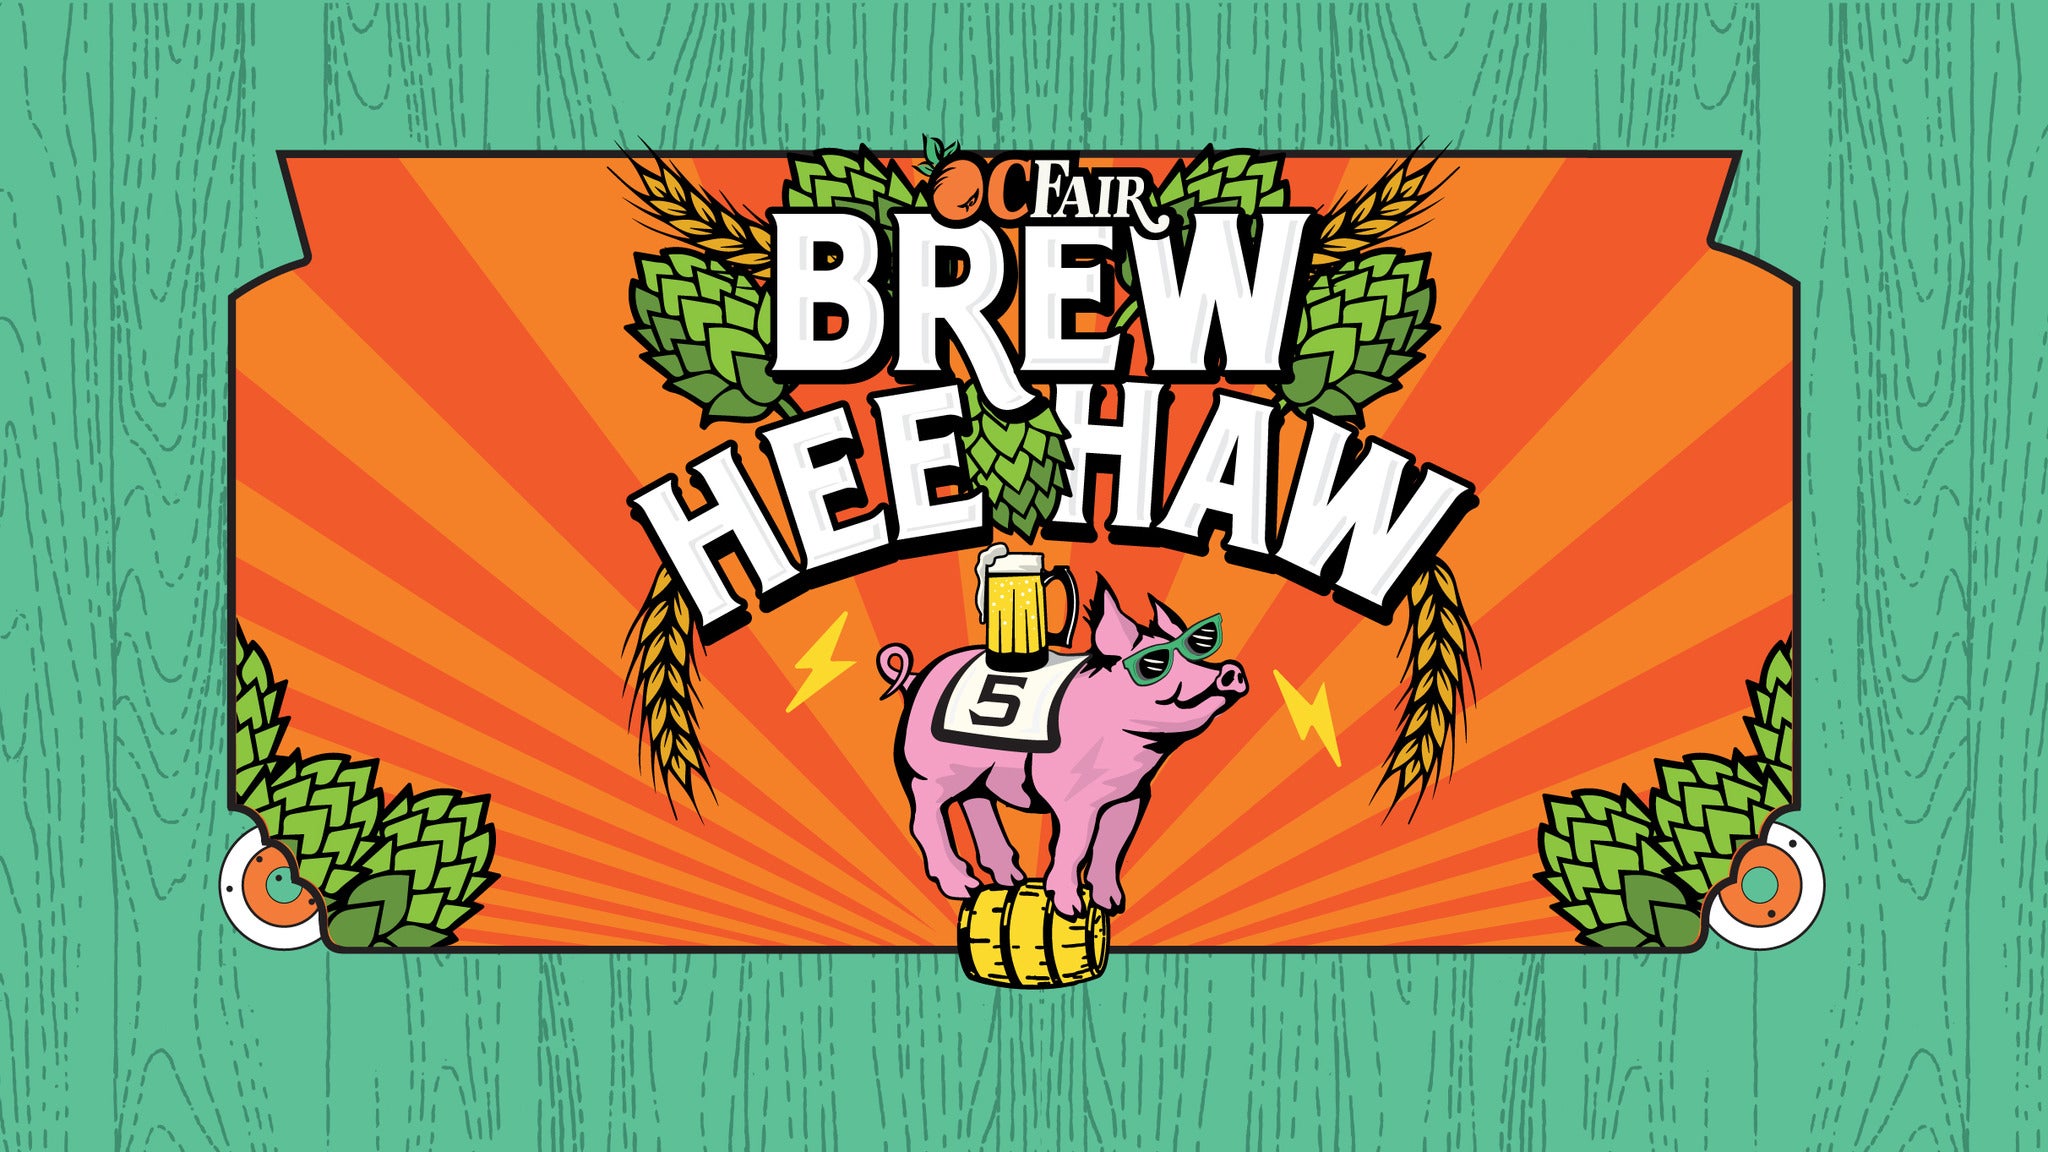 OC Brew Hee Haw - "The 90s Rock" General Admission Session